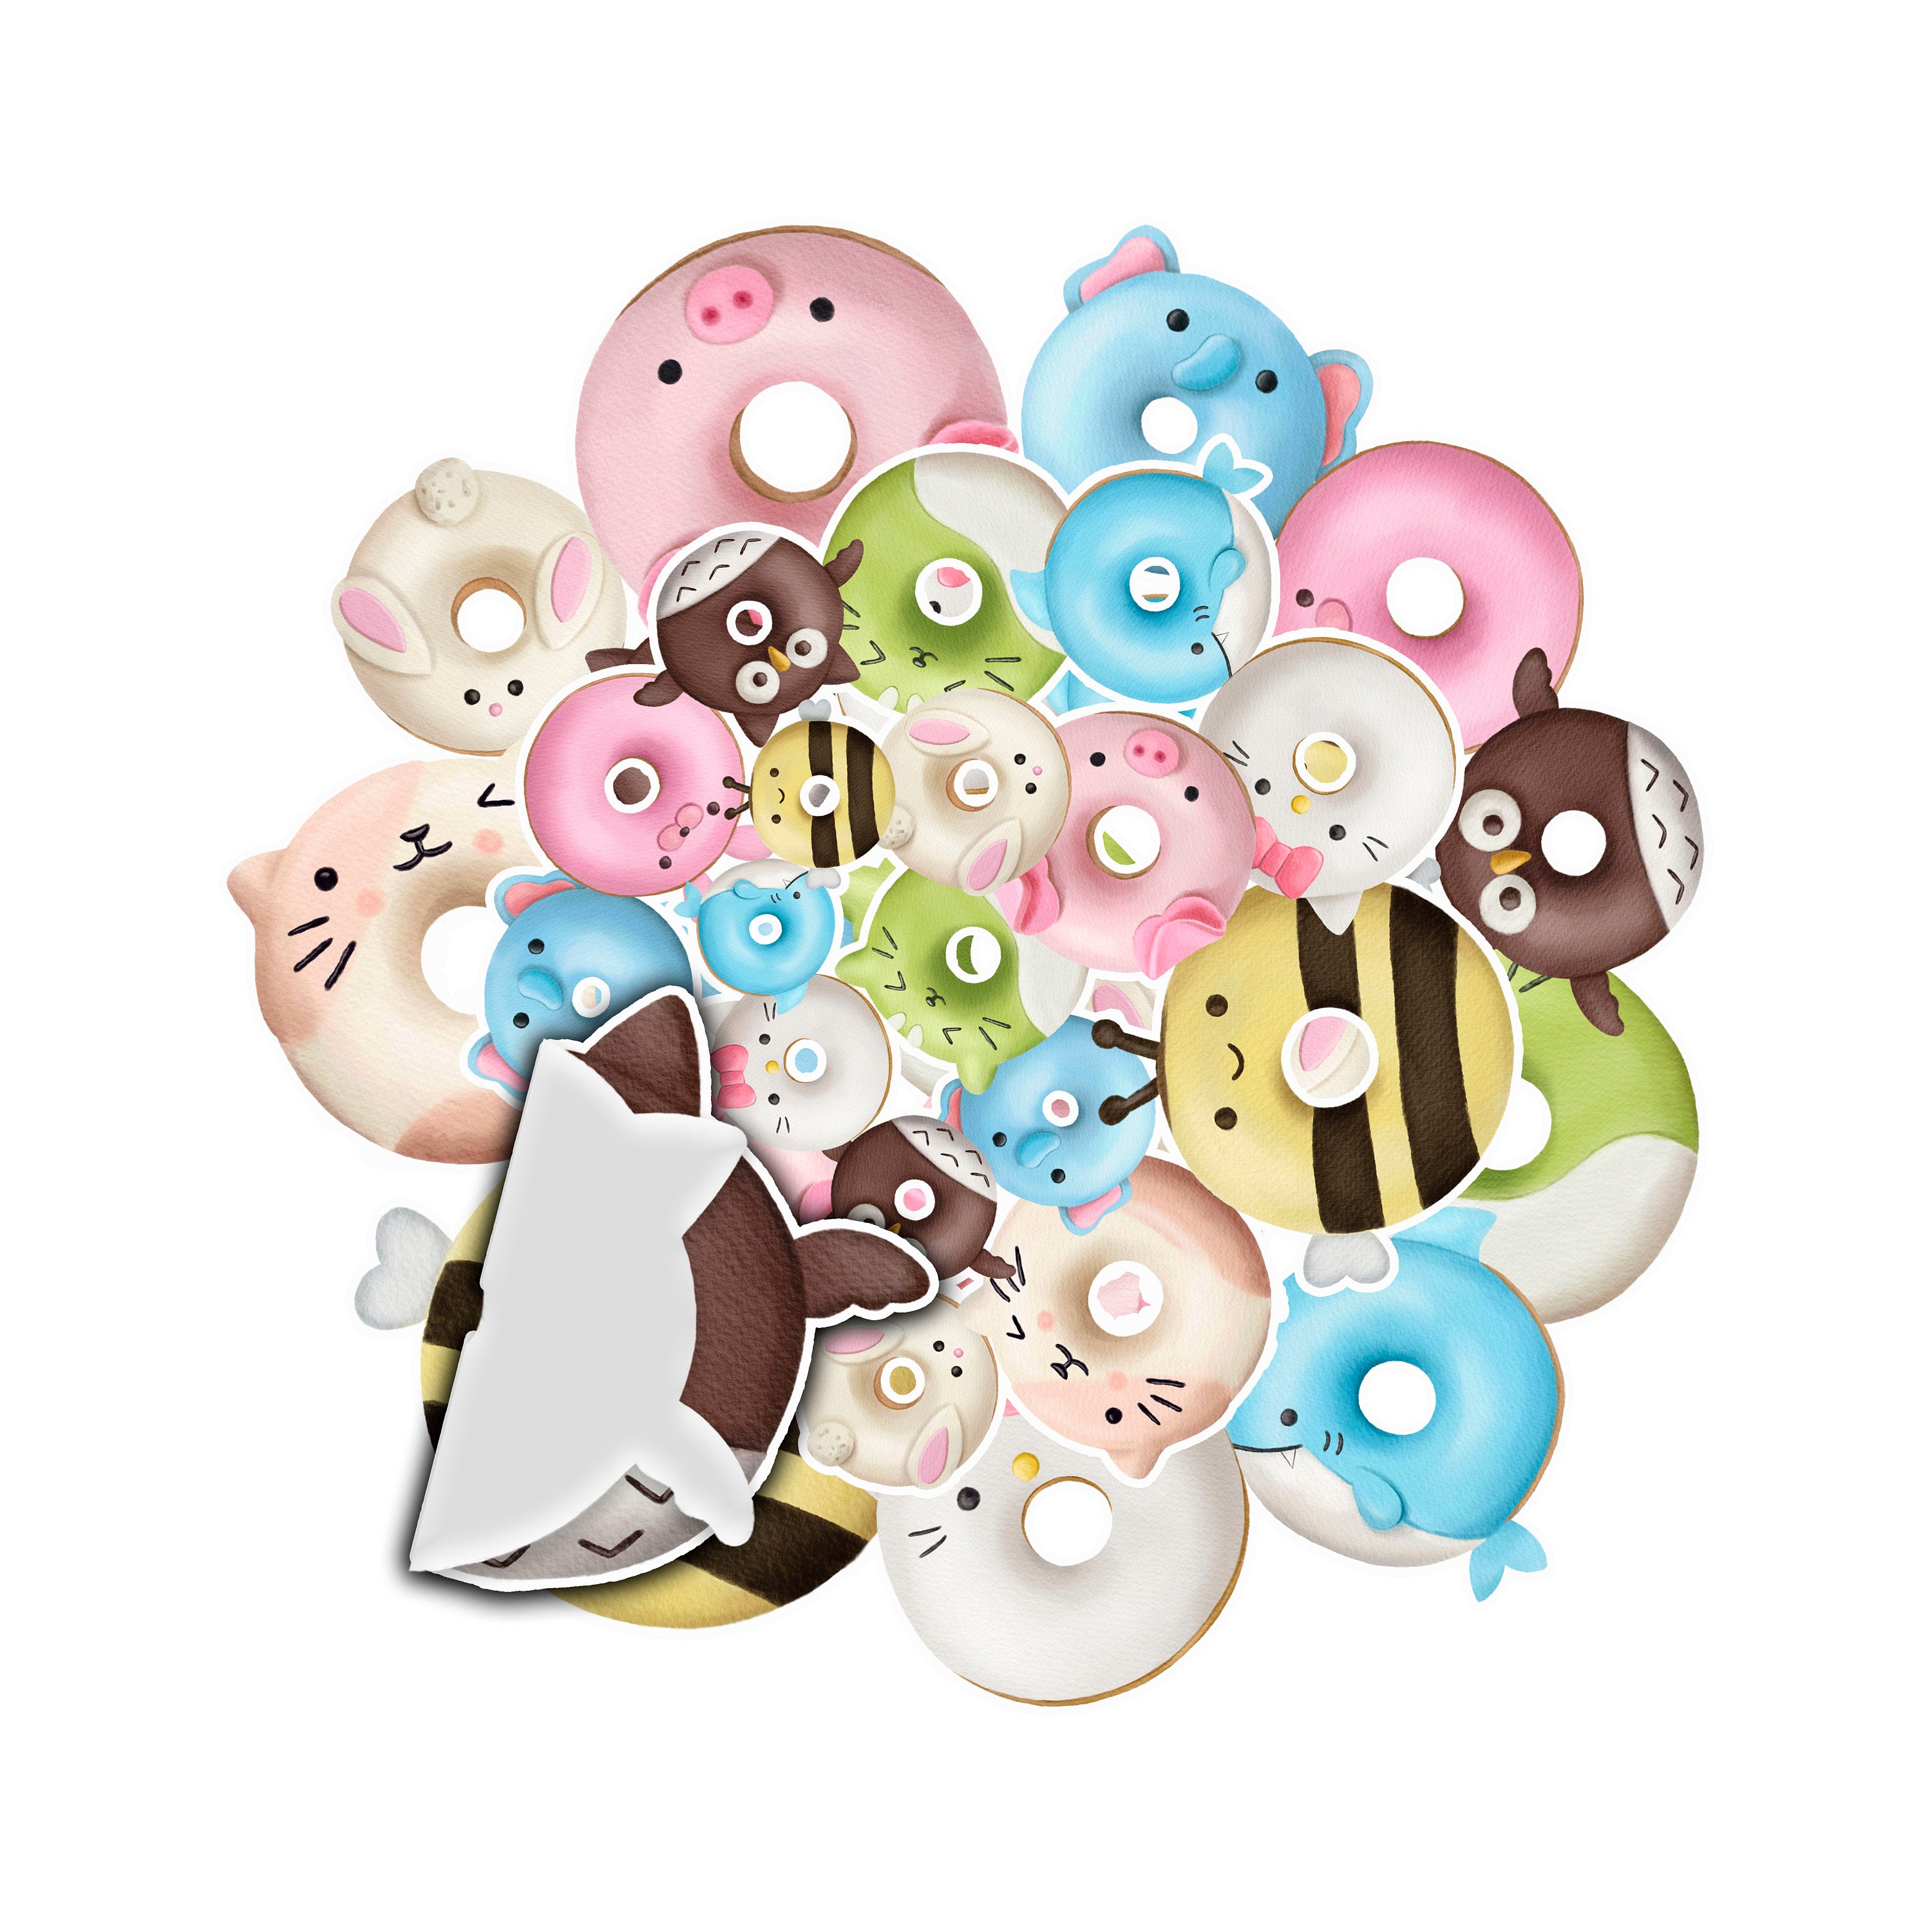 Squishy Donut Delights" Stickers